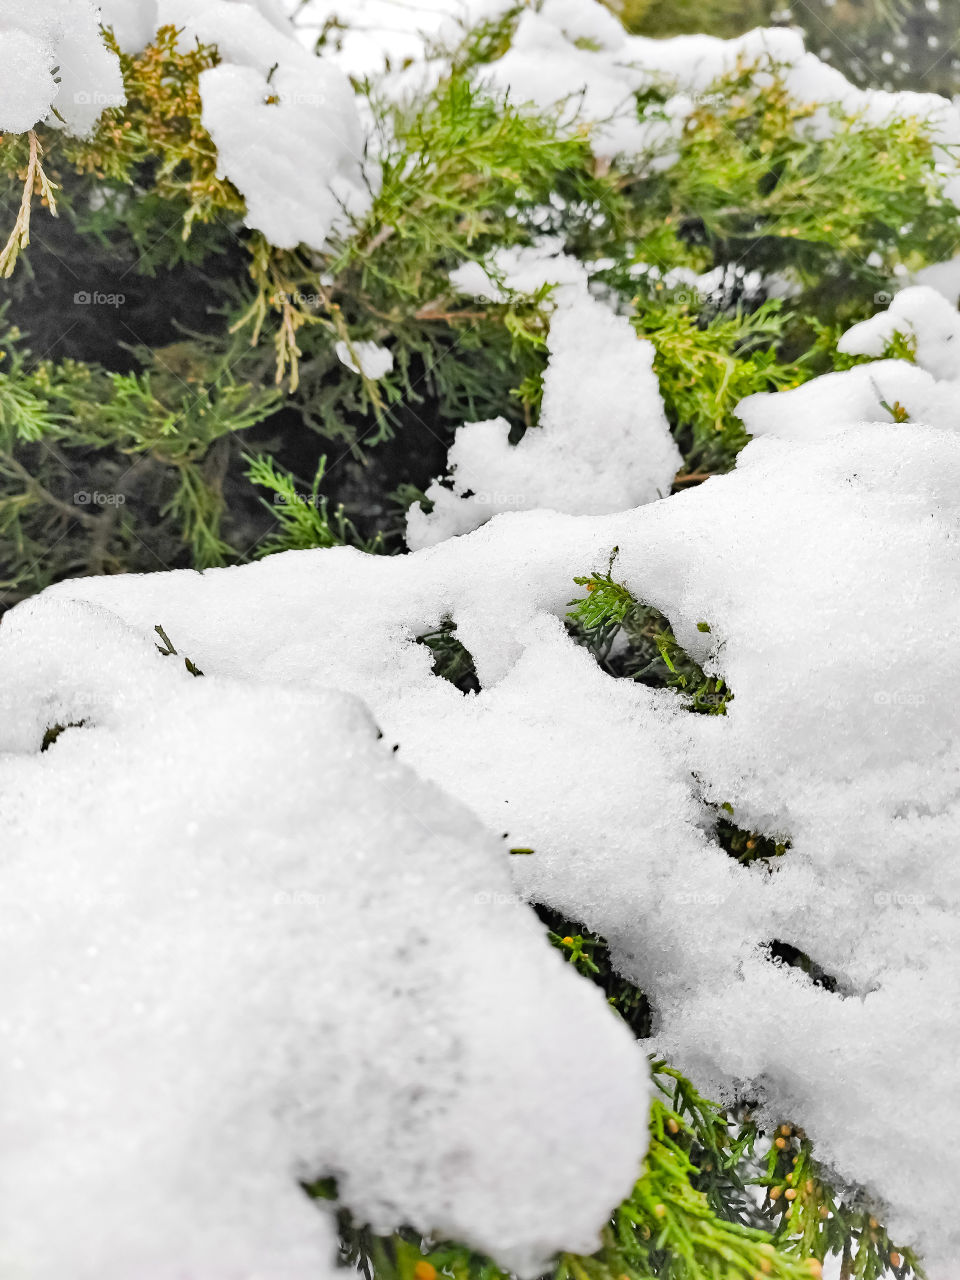 White snow lies on a conifer with a blurred background.